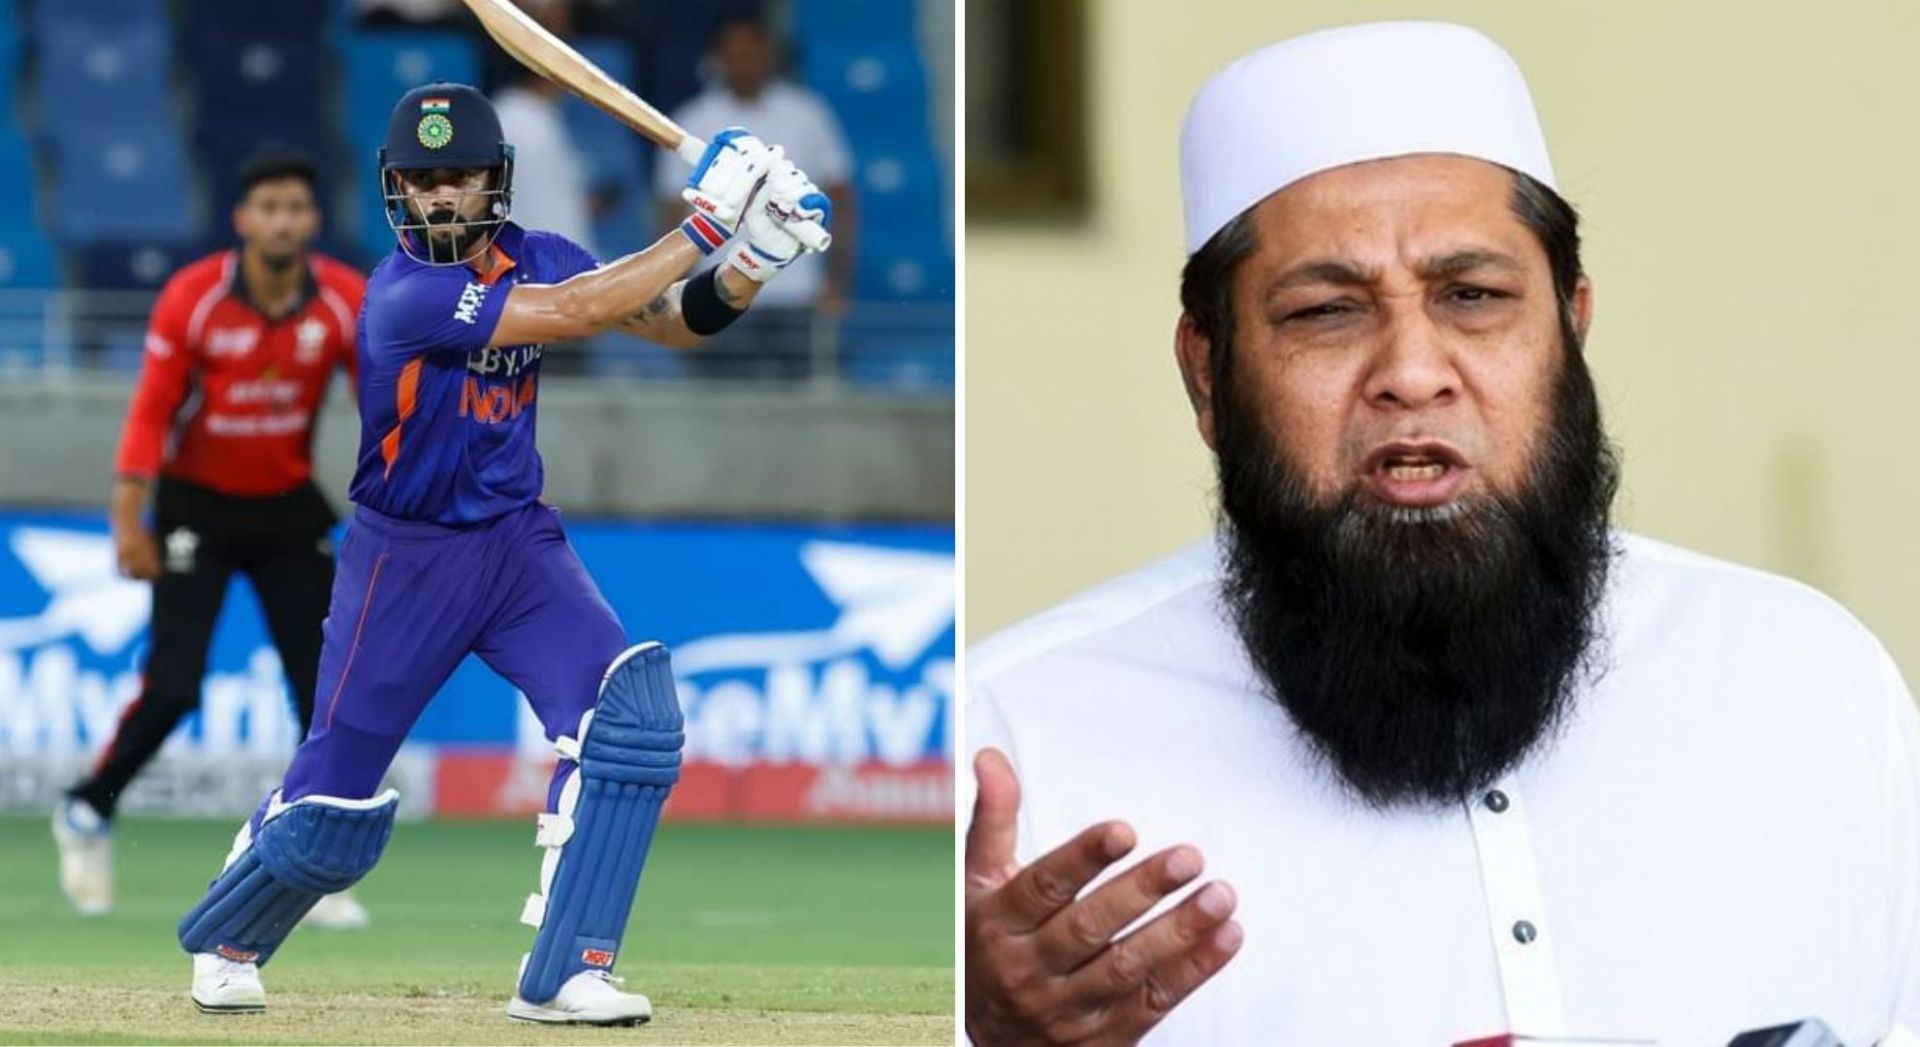 Inzamam feels that Kohli will continue his stellar form in Asia Cup.